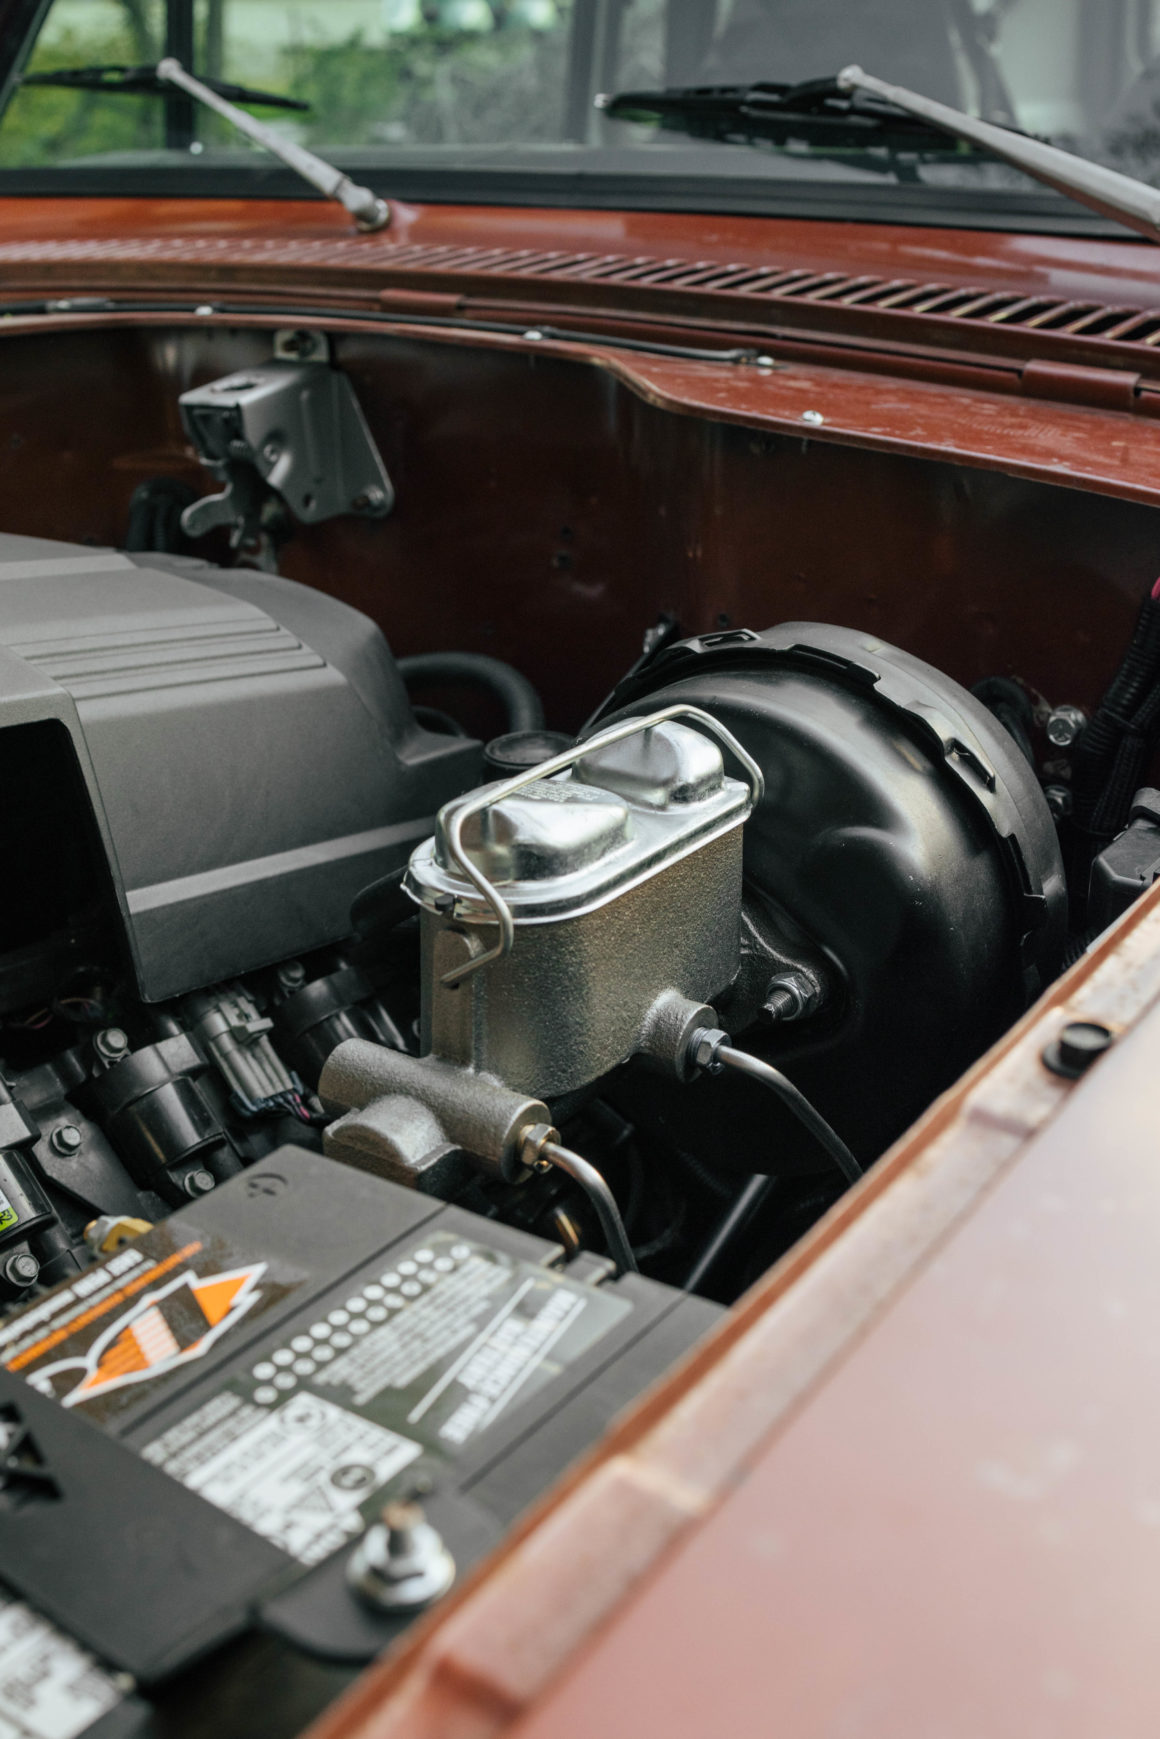 Scout II engine bay